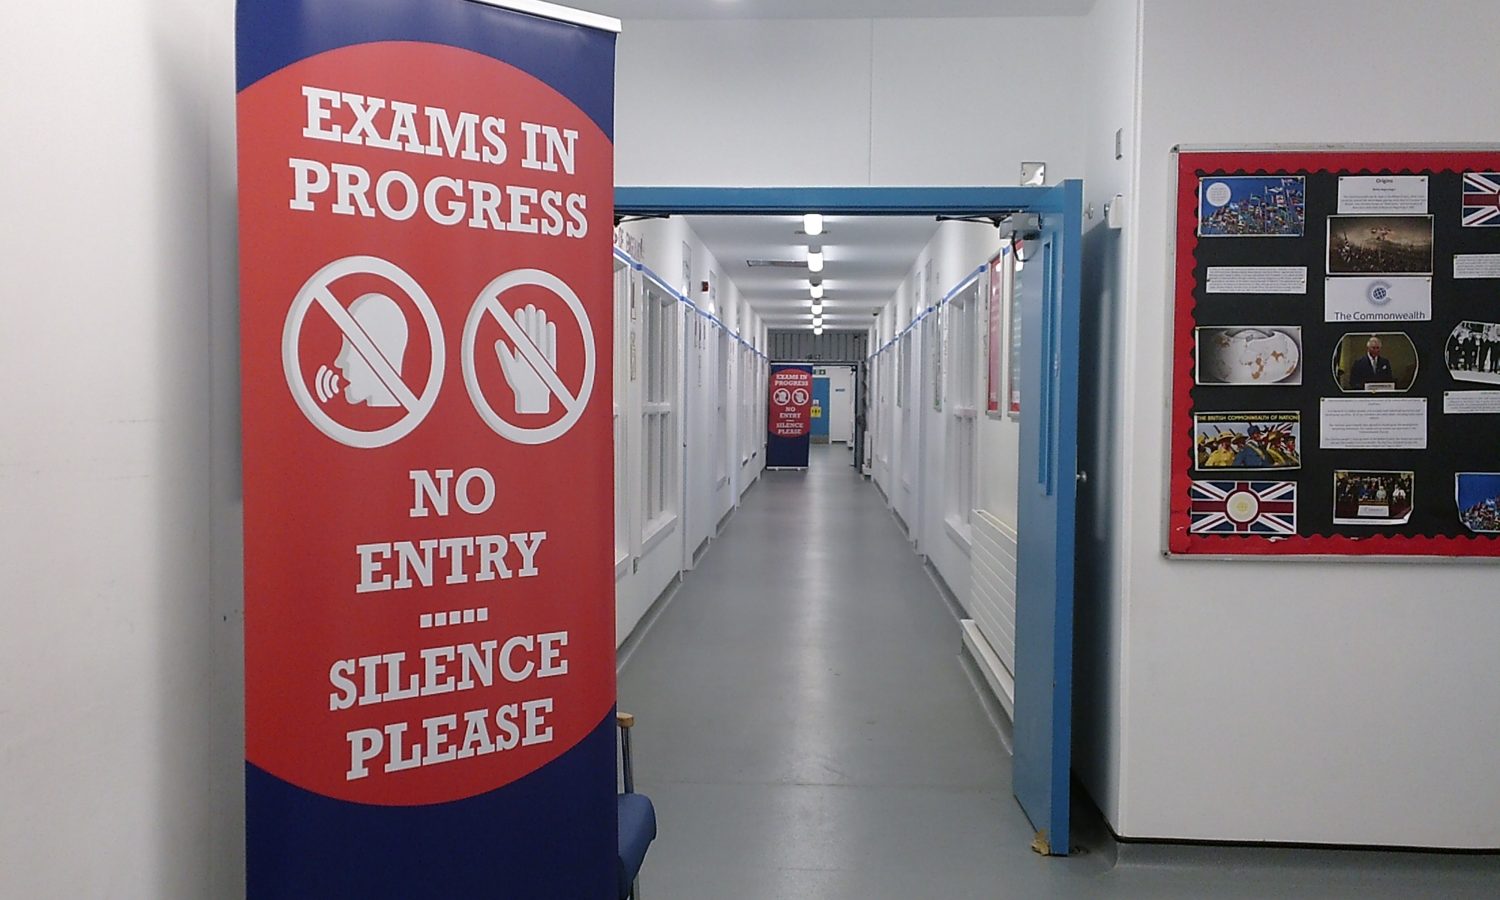 The image looks down a long, clean white corridor. A large pull up banner is in the foreground which says "Exams in Progress. No entry, silence please."